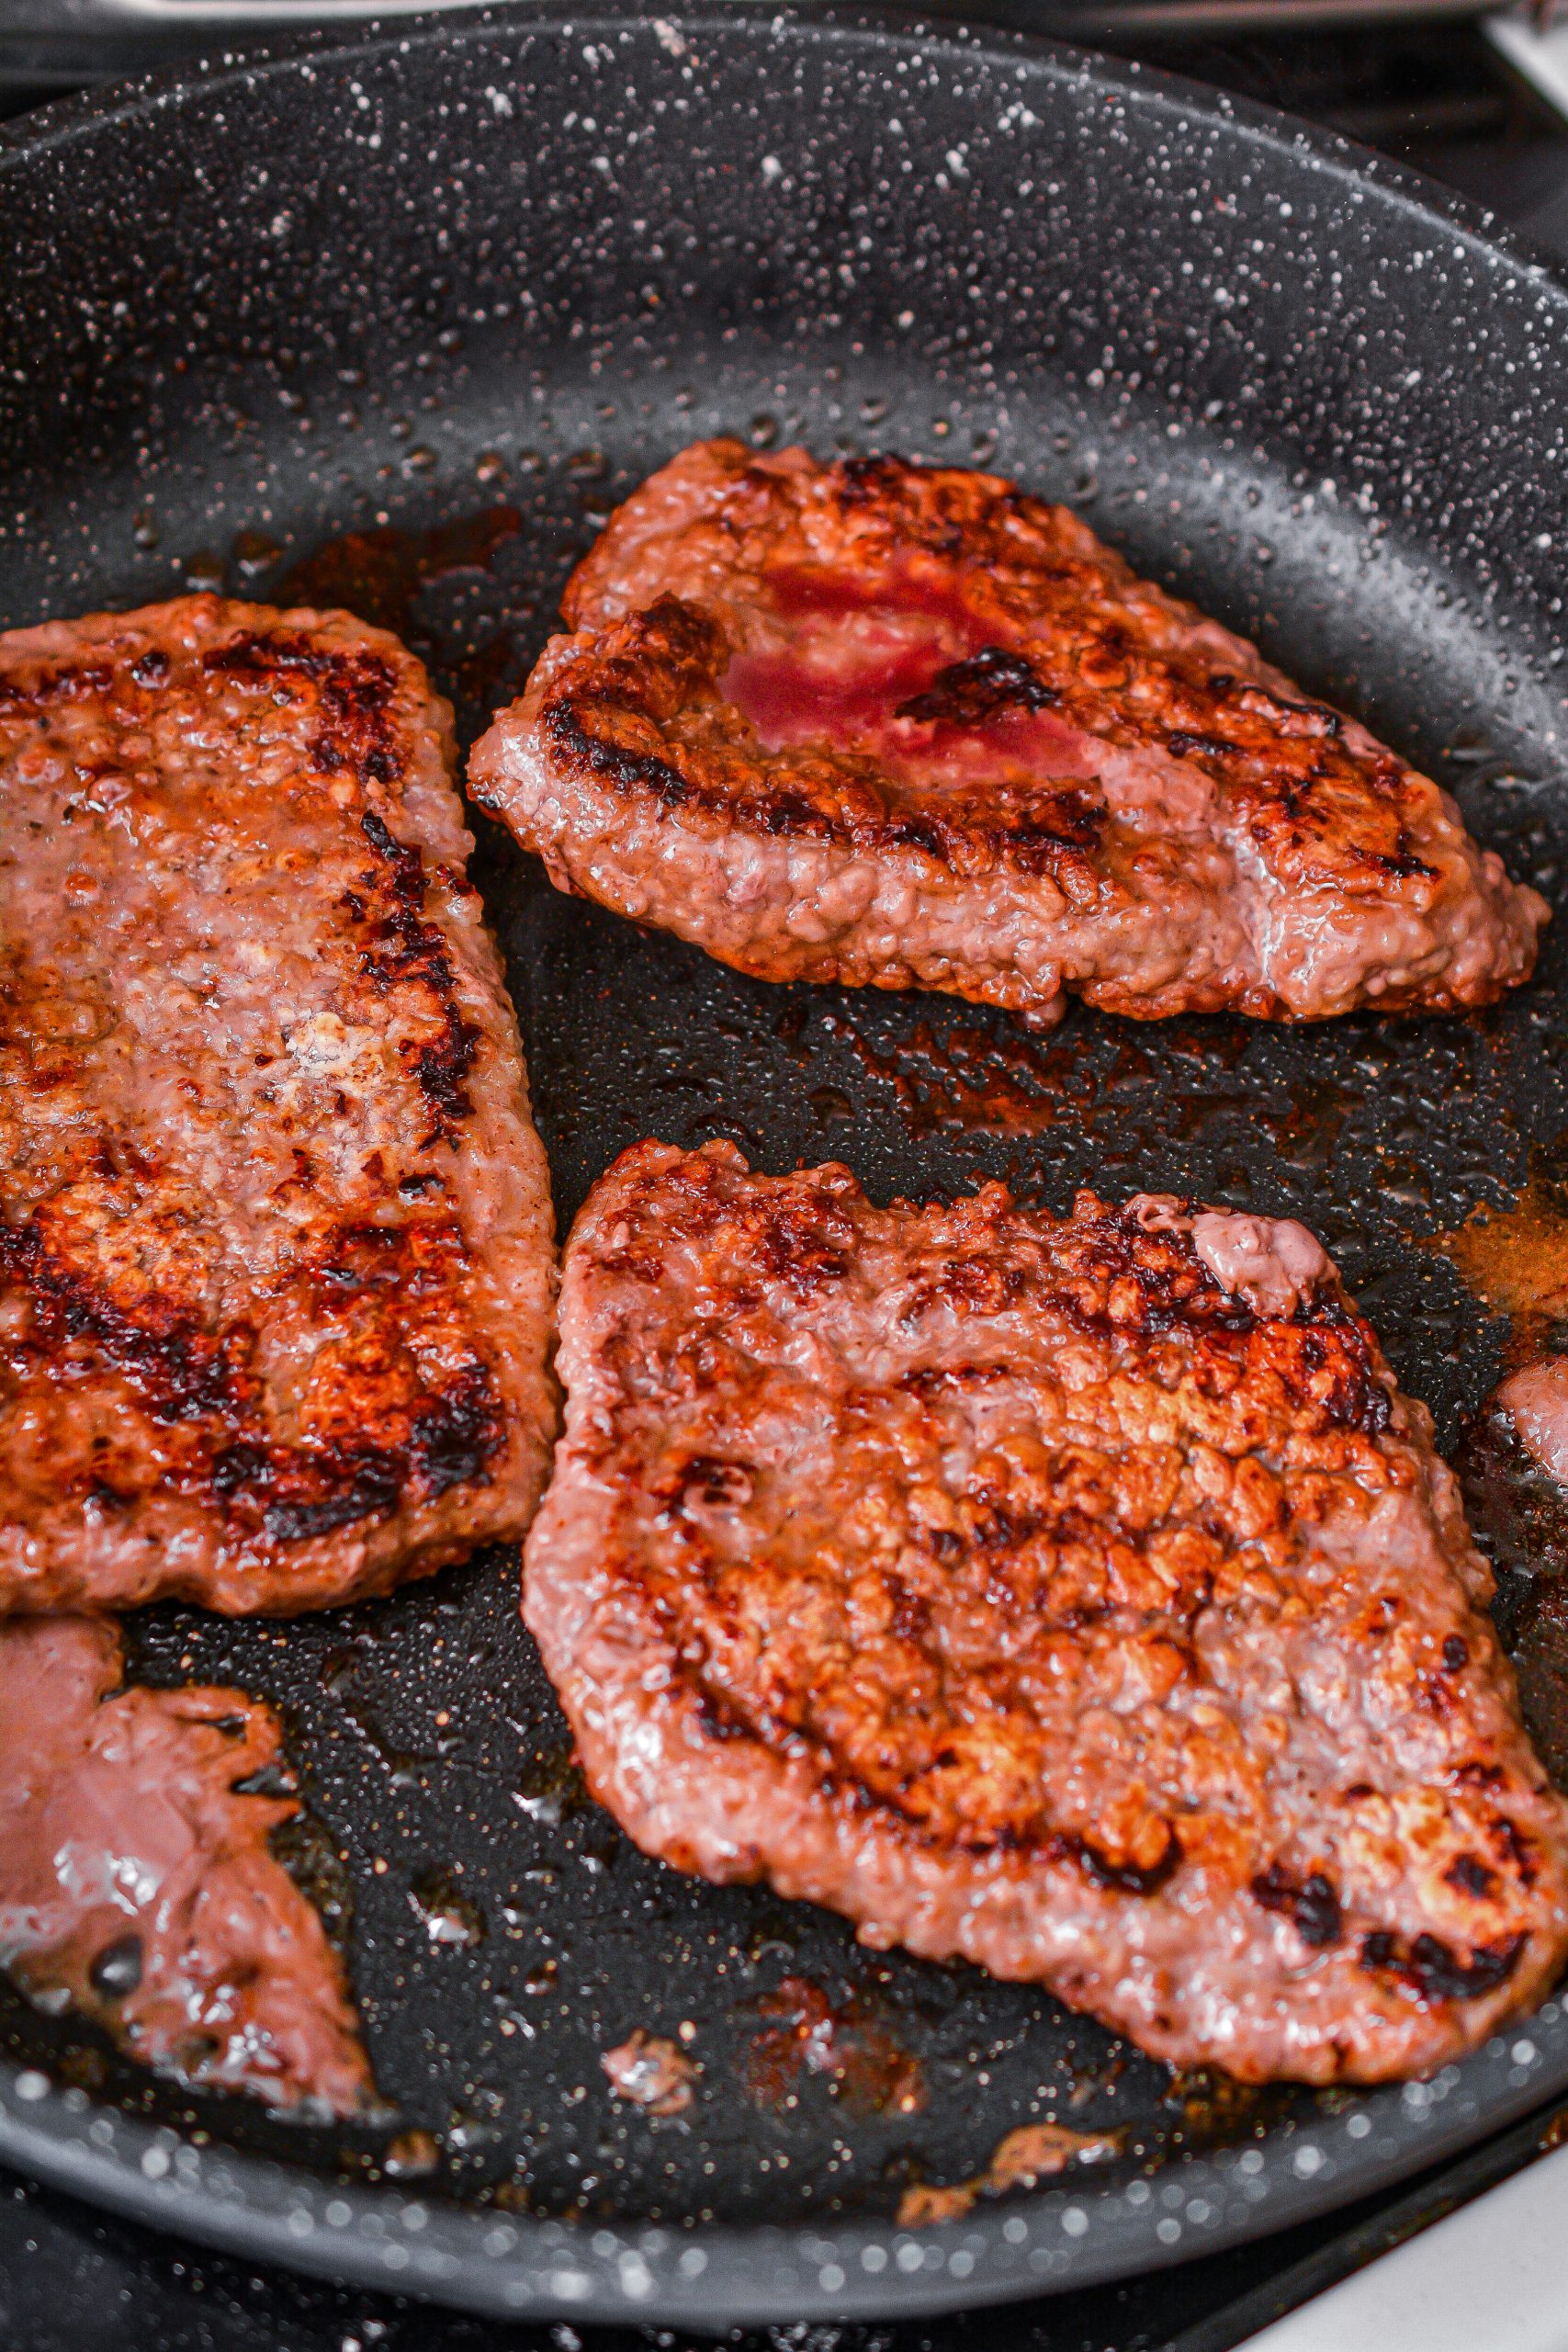 Add the steak to the heated skillet and sear on both sides evenly, cooking until your desired doneness has been reached. Set aside on a plate.